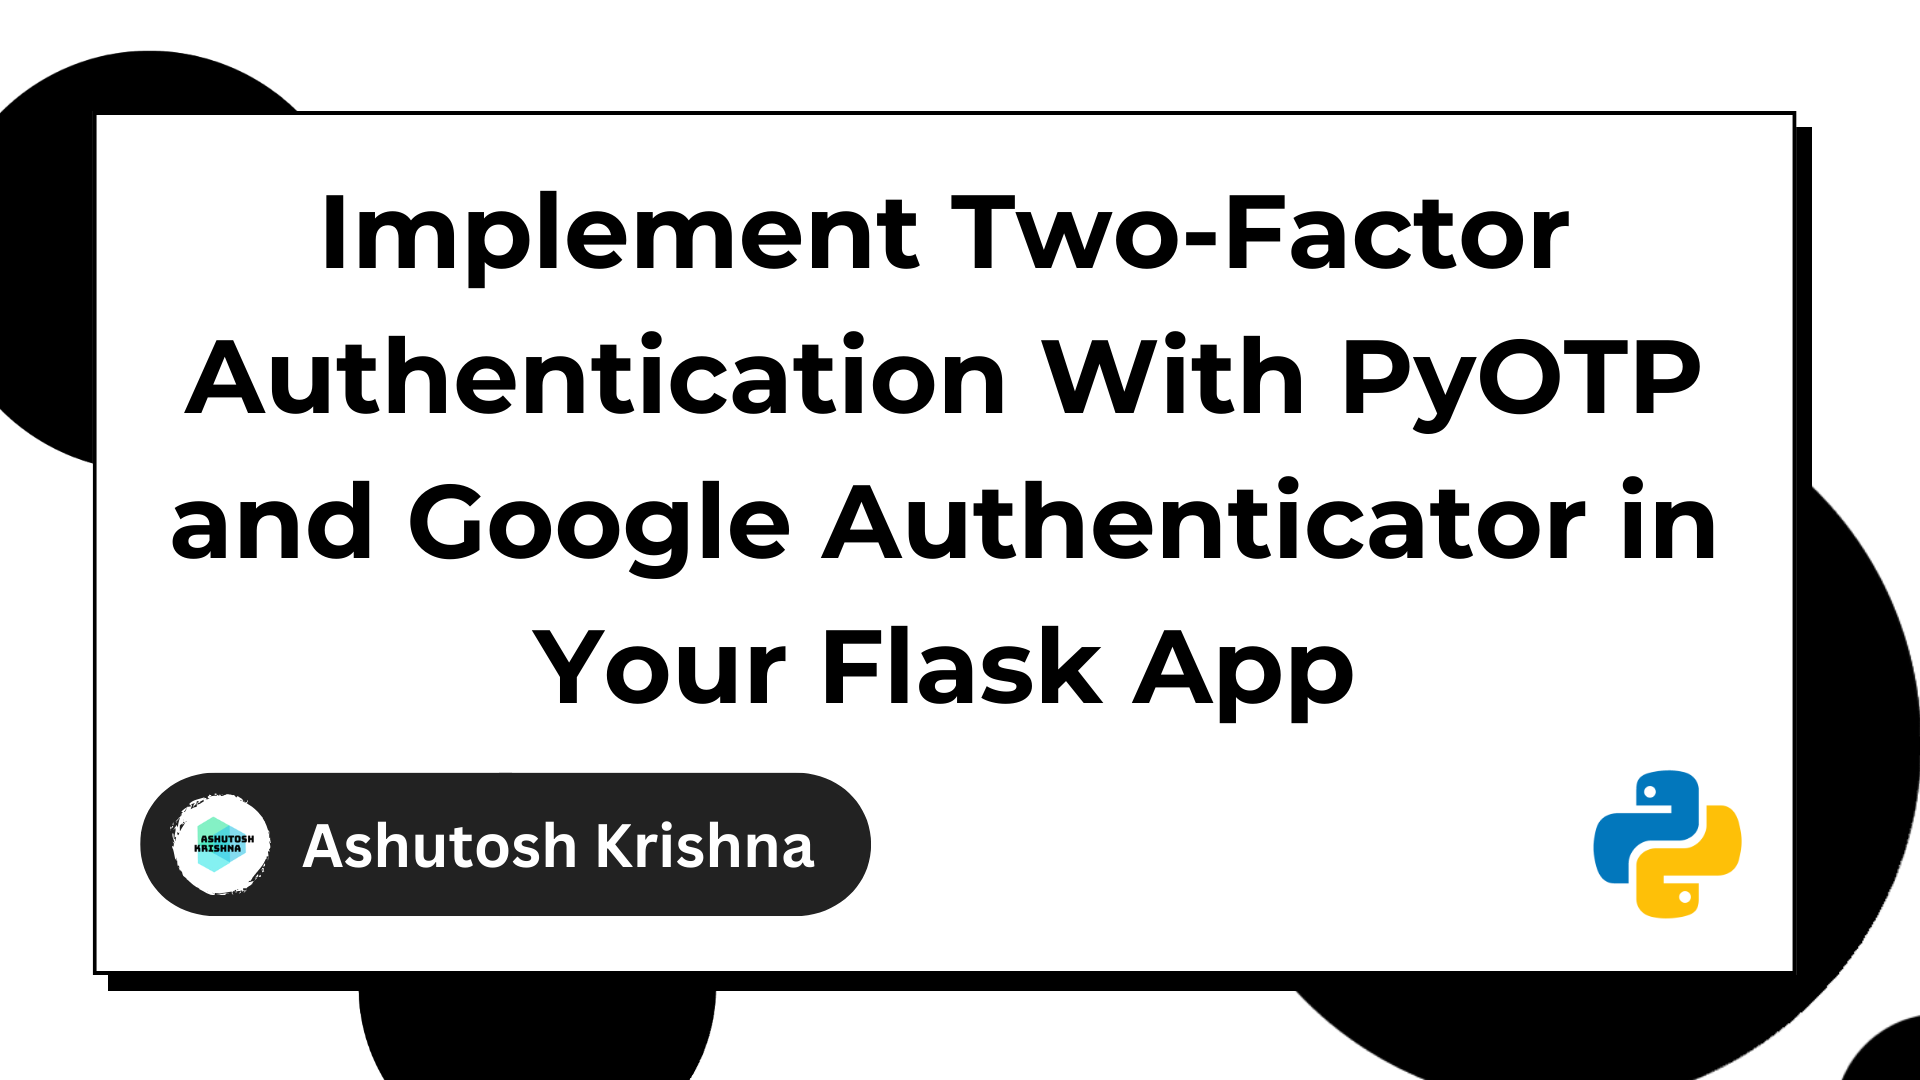 How to Implement Two-Factor Authentication with PyOTP and Google Authenticator in Your Flask App